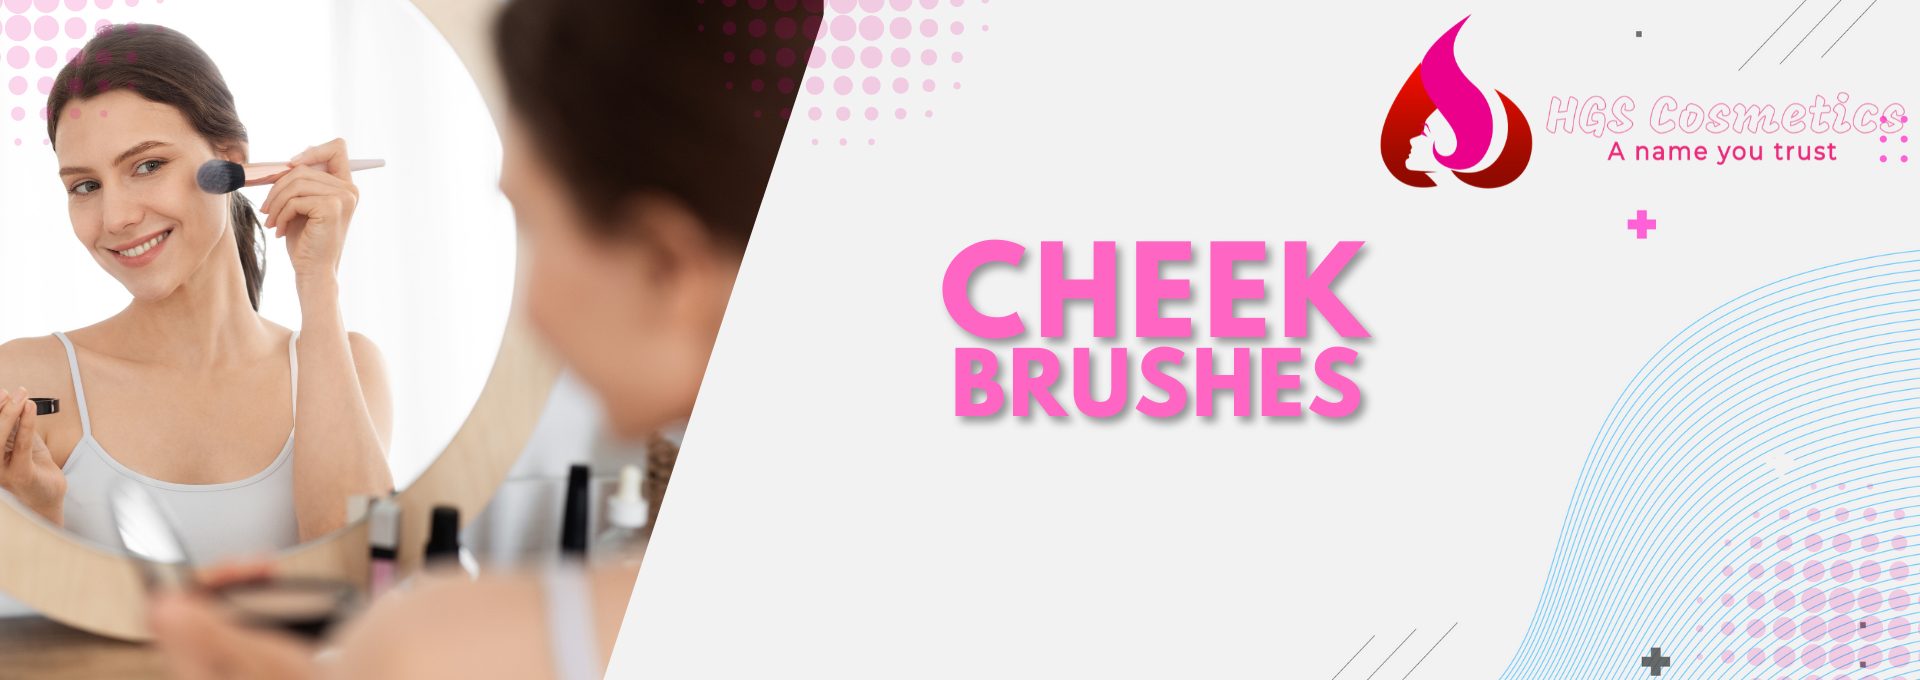 Shop Best Cheek Brushes products Online @ HGS Cosmetics